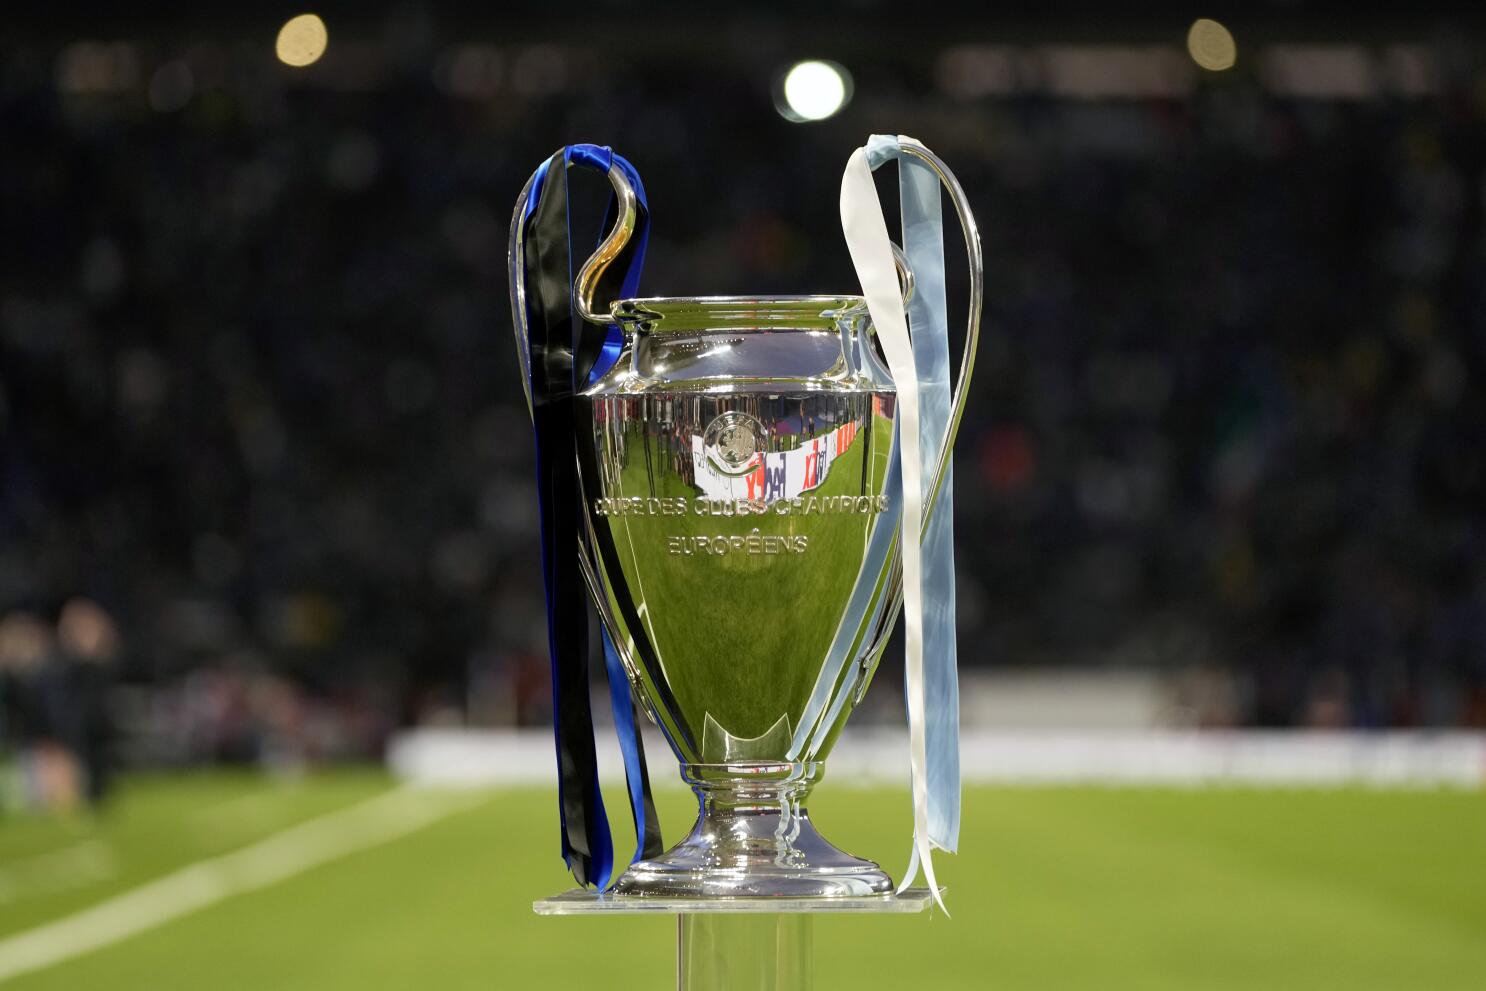 Uefa could strip Russia of Champions League final over Ukraine